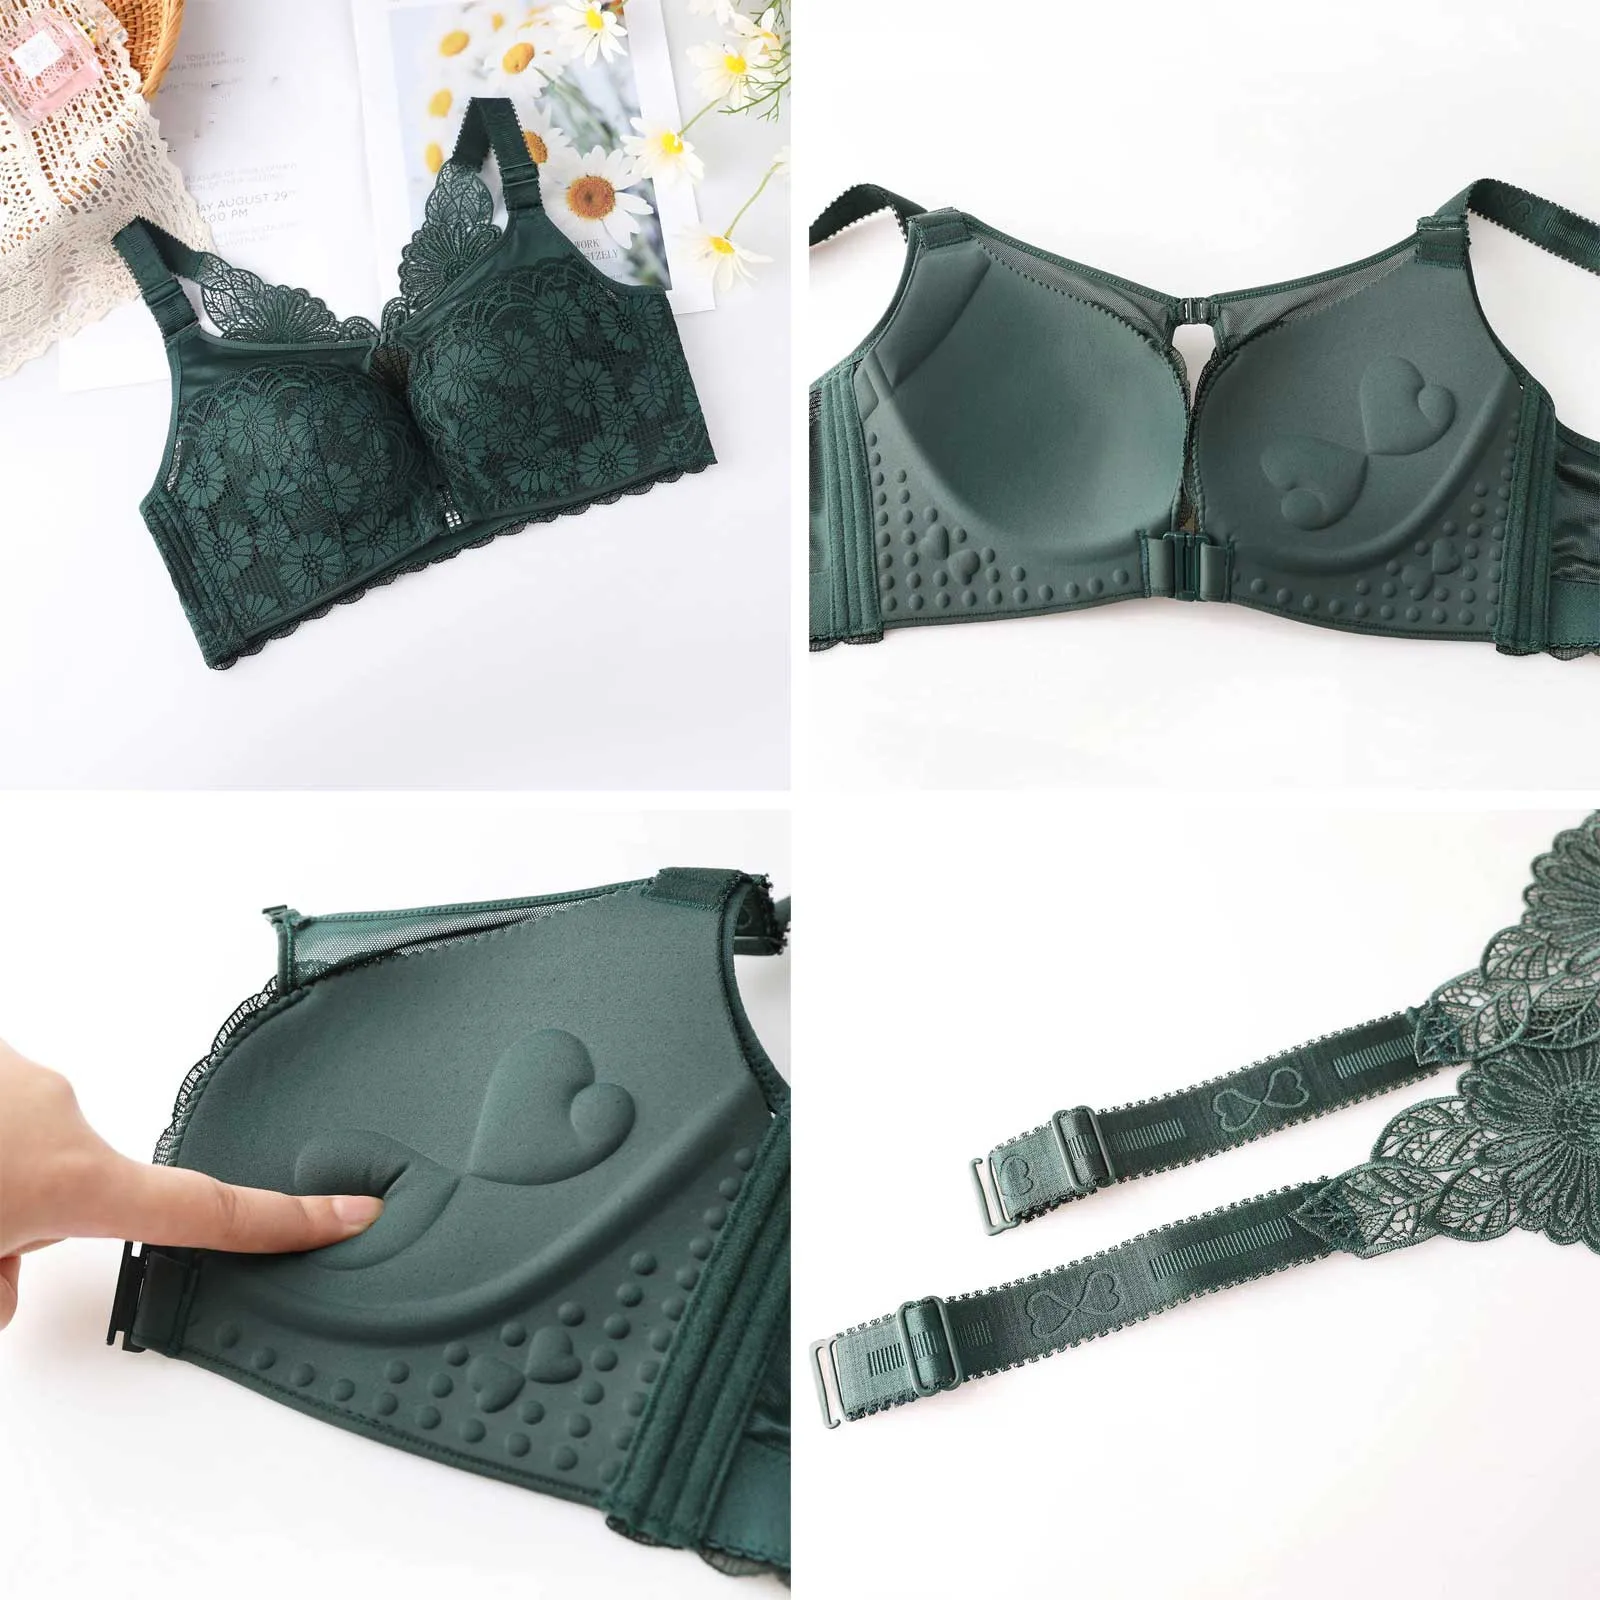 

Women's Front Closure Extra-Elastic Large Shaping Posture Lift Bras upgrade lace cute ladies tank bra soft breathable bra #4